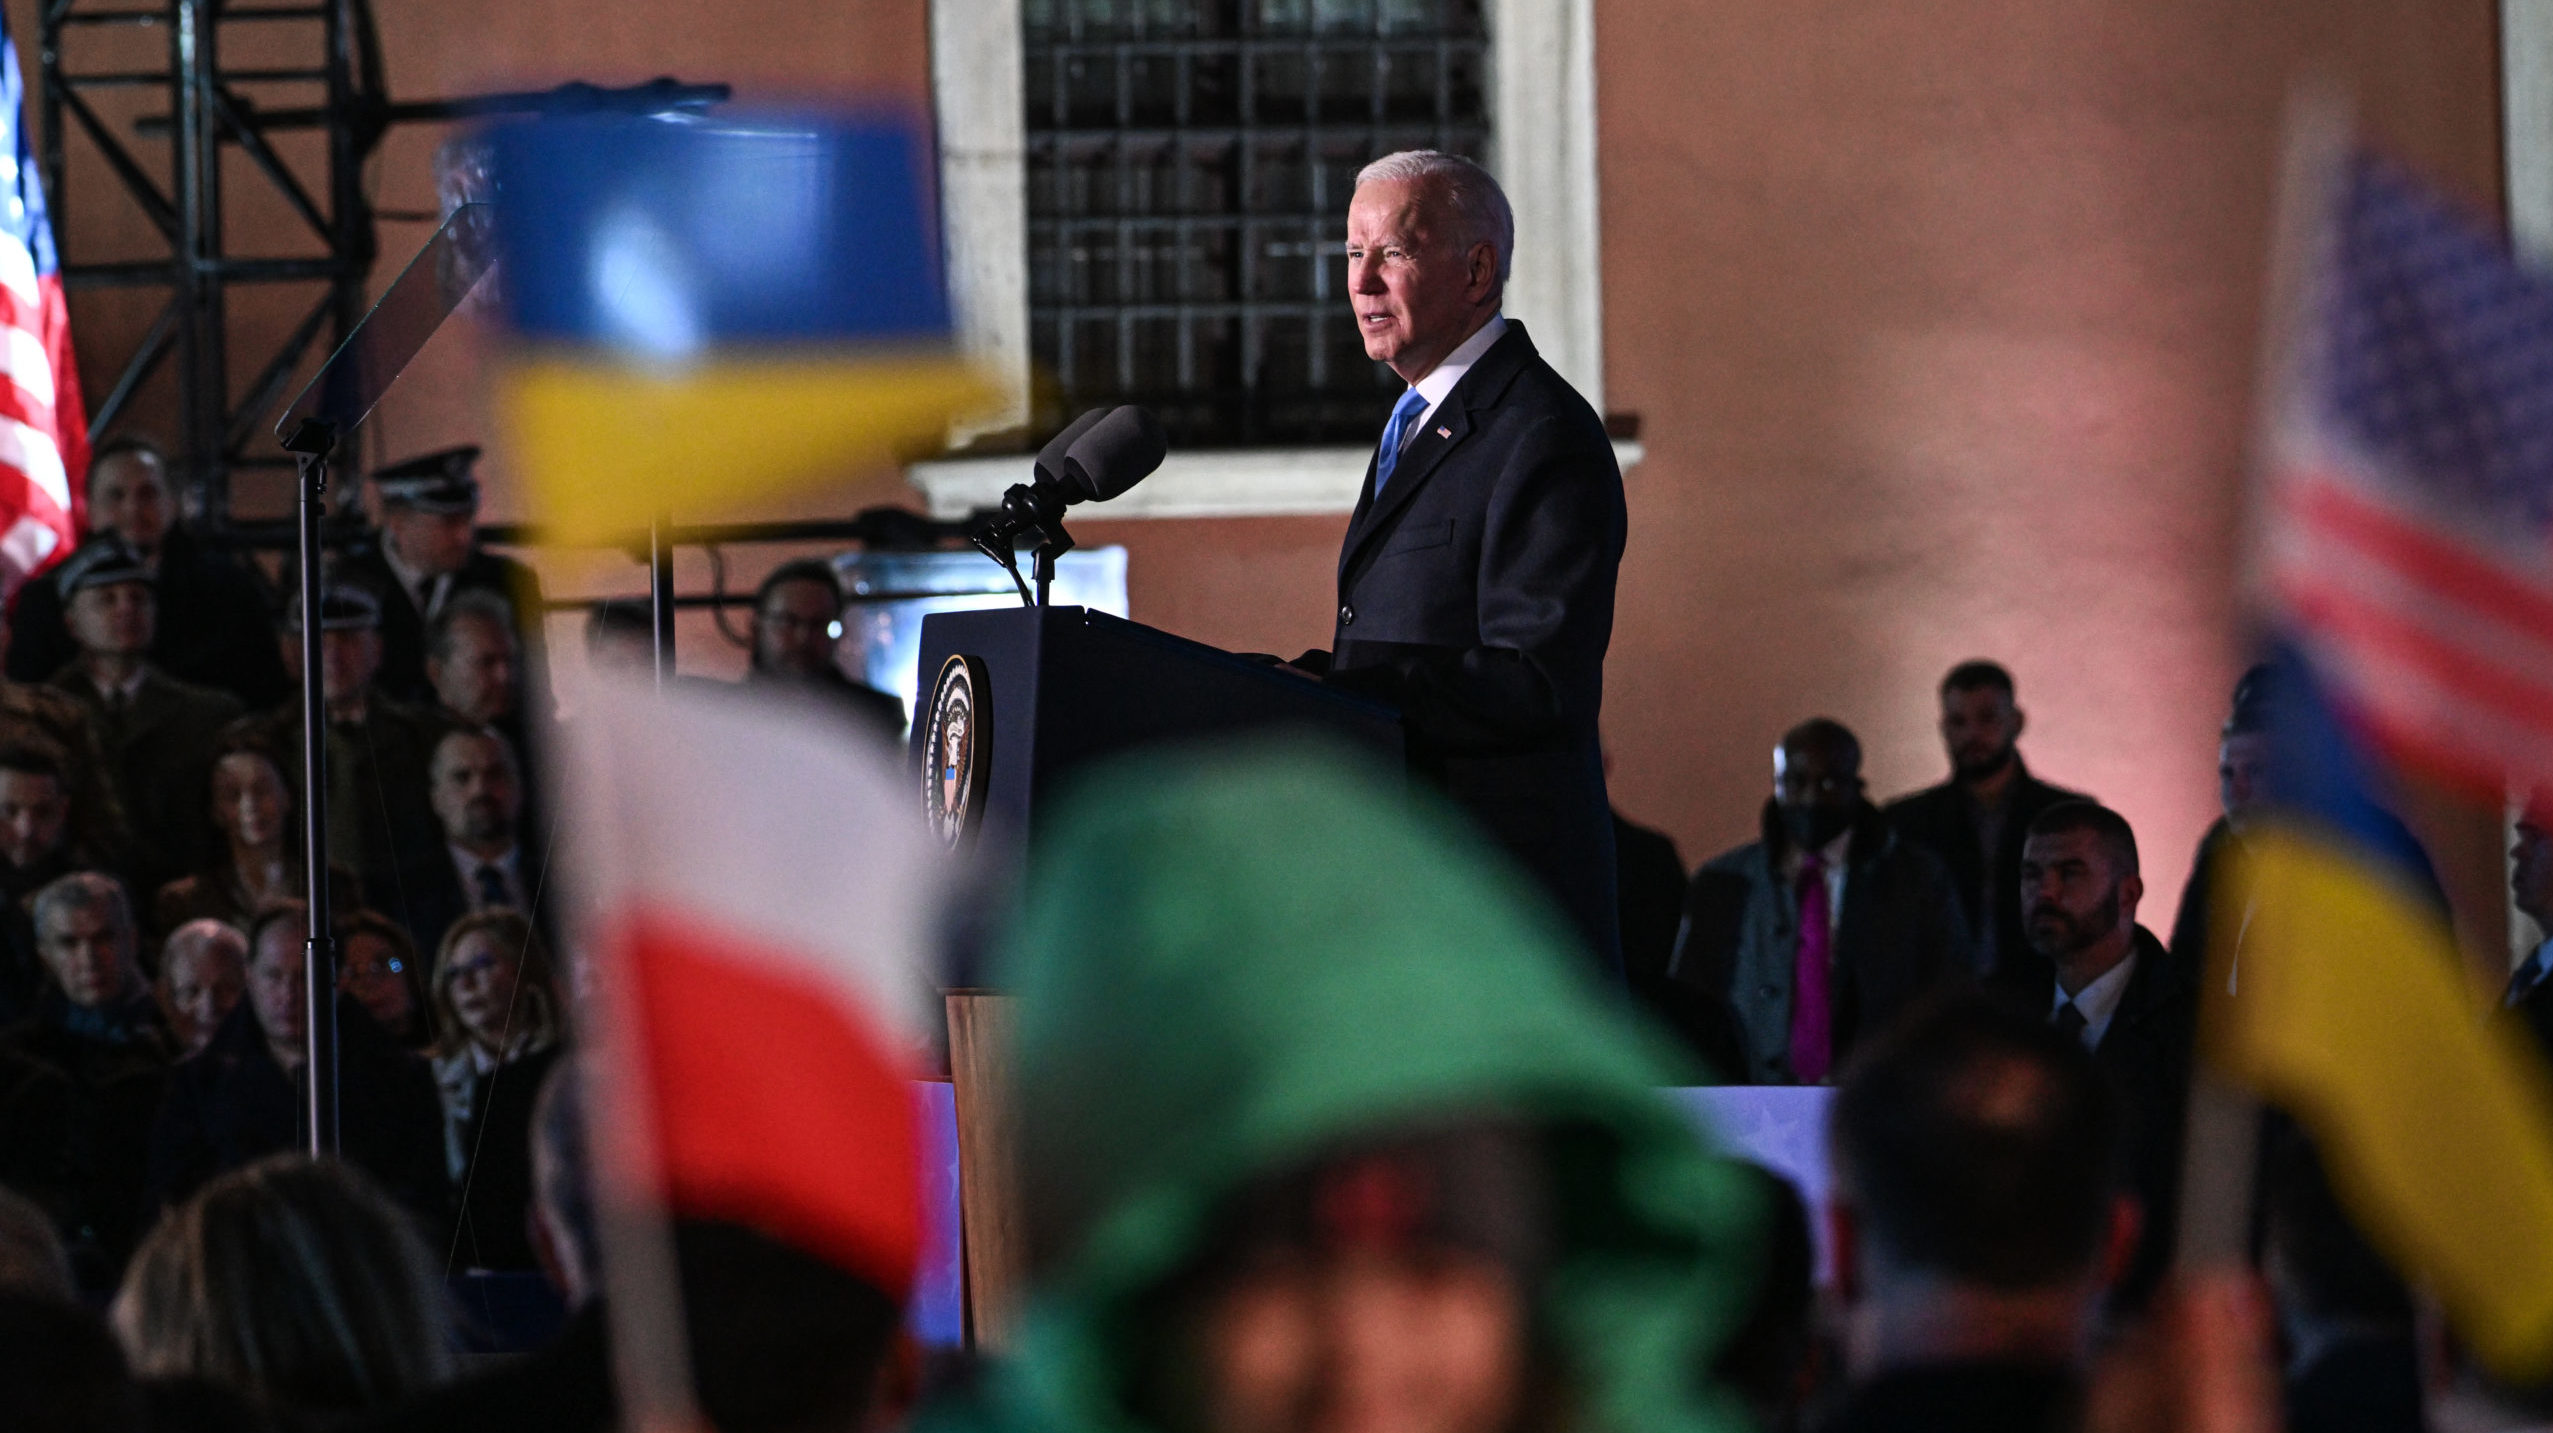 President Joe Biden, in Poland after his lightning trip to Ukraine, is declaring that there are “...